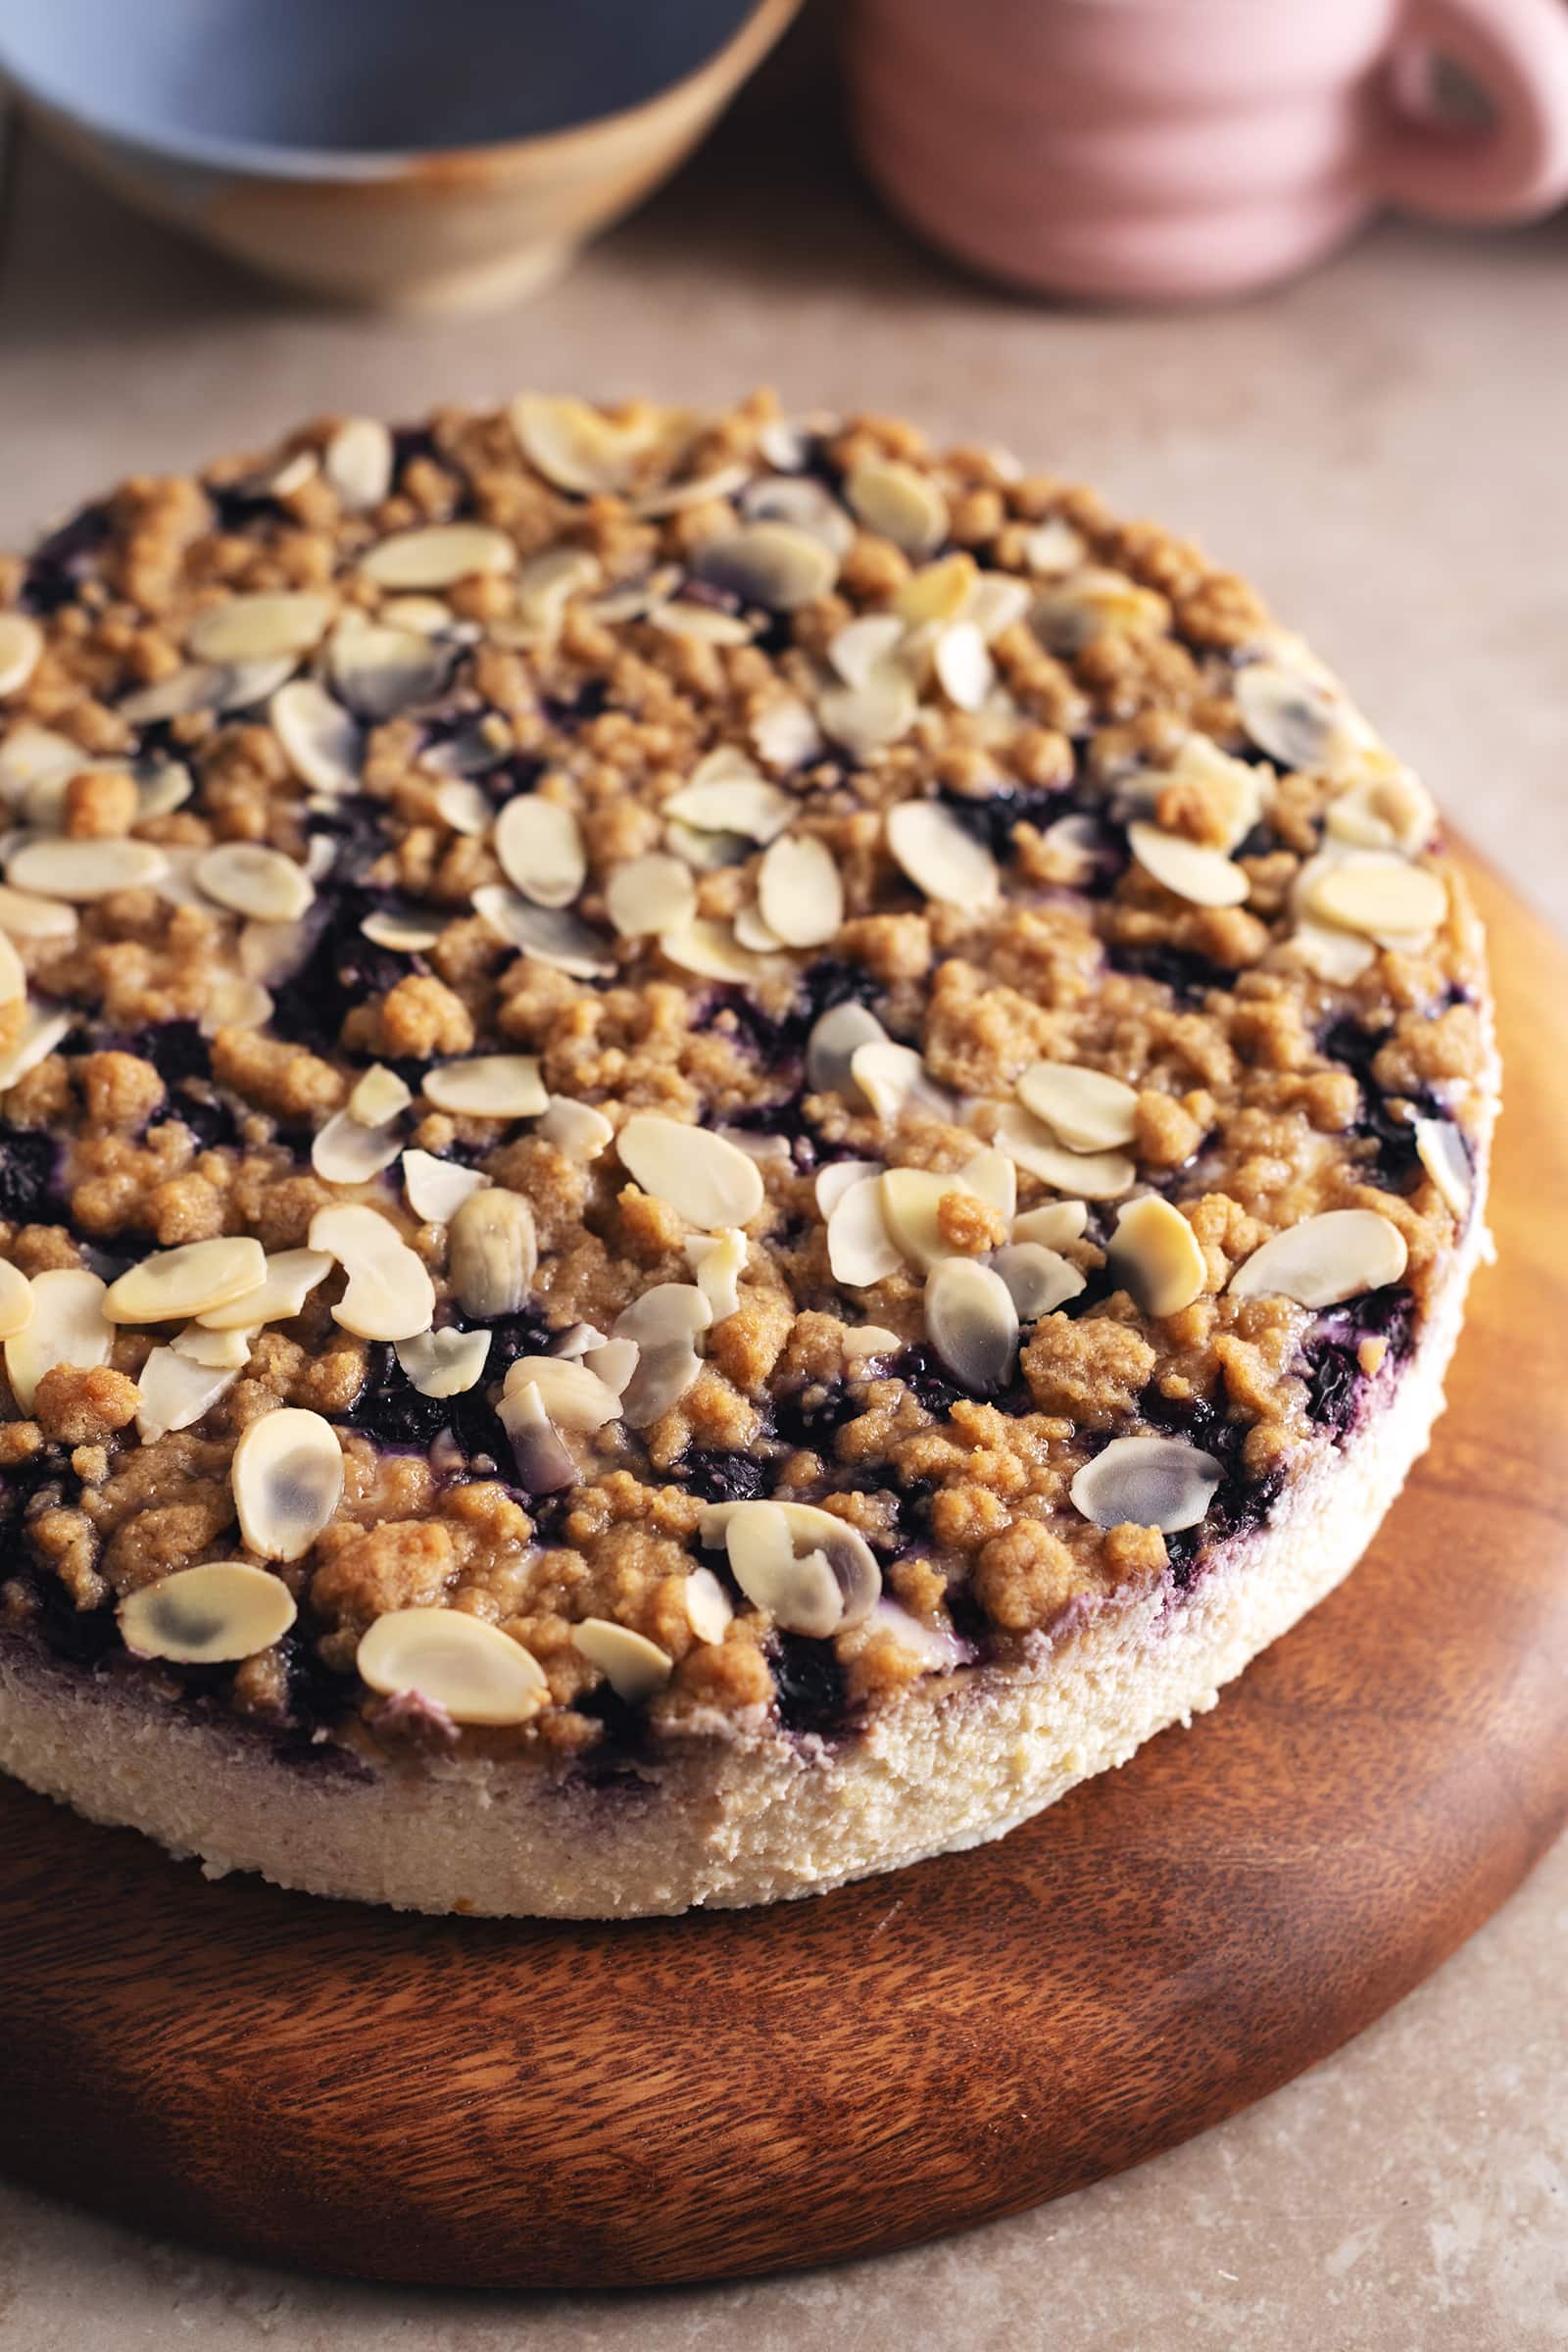 A blueberry crumble cheesecake on a wooden platter.